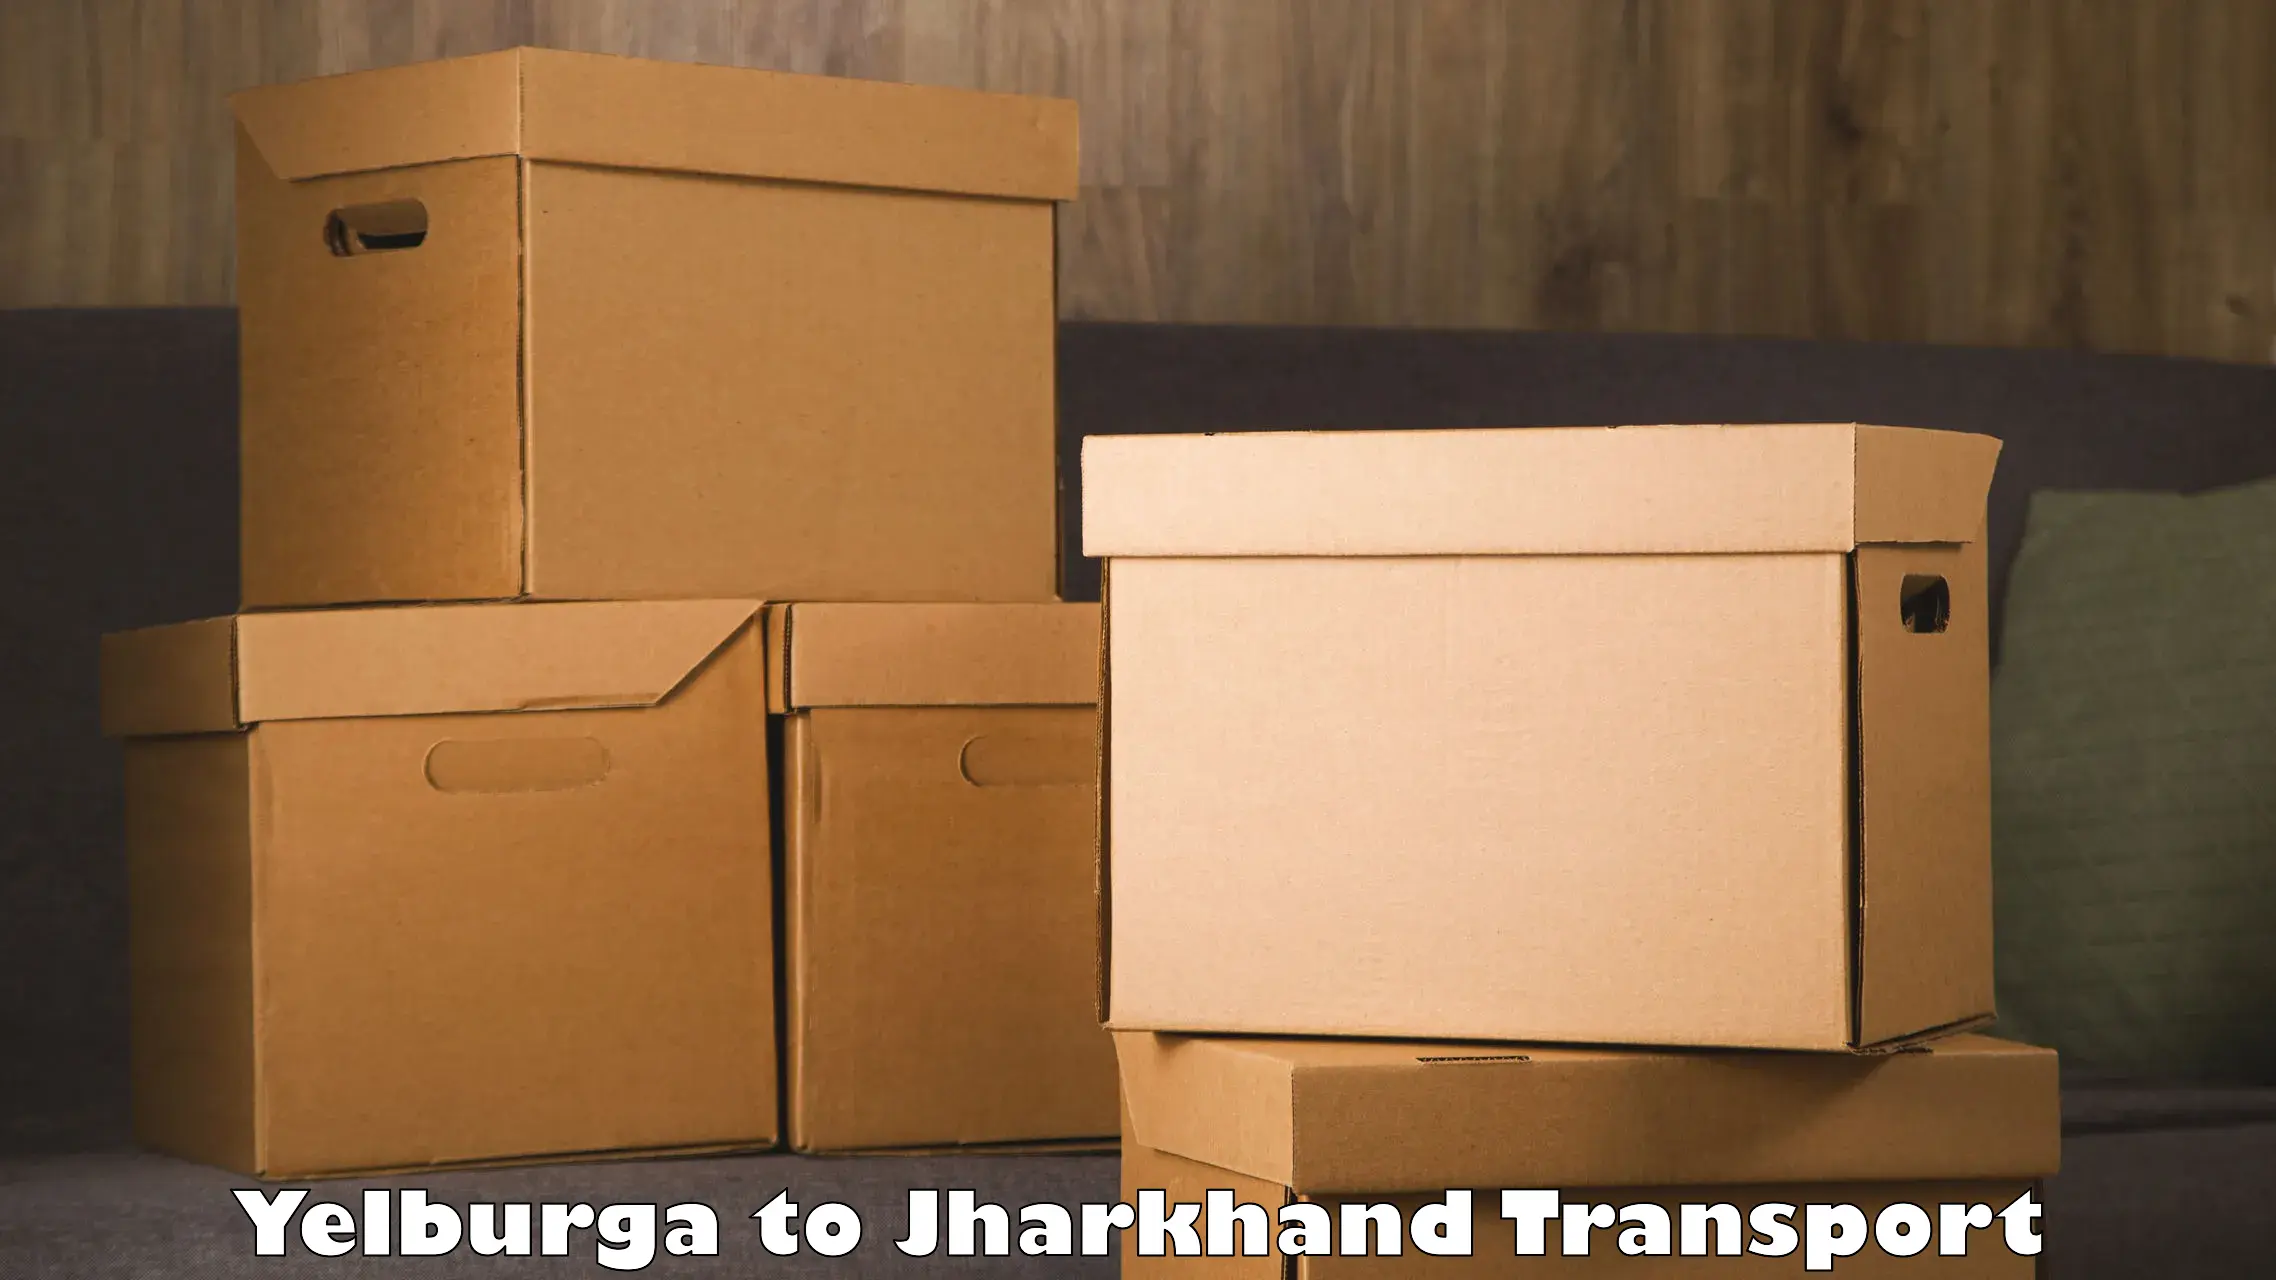 Parcel transport services Yelburga to Jharkhand